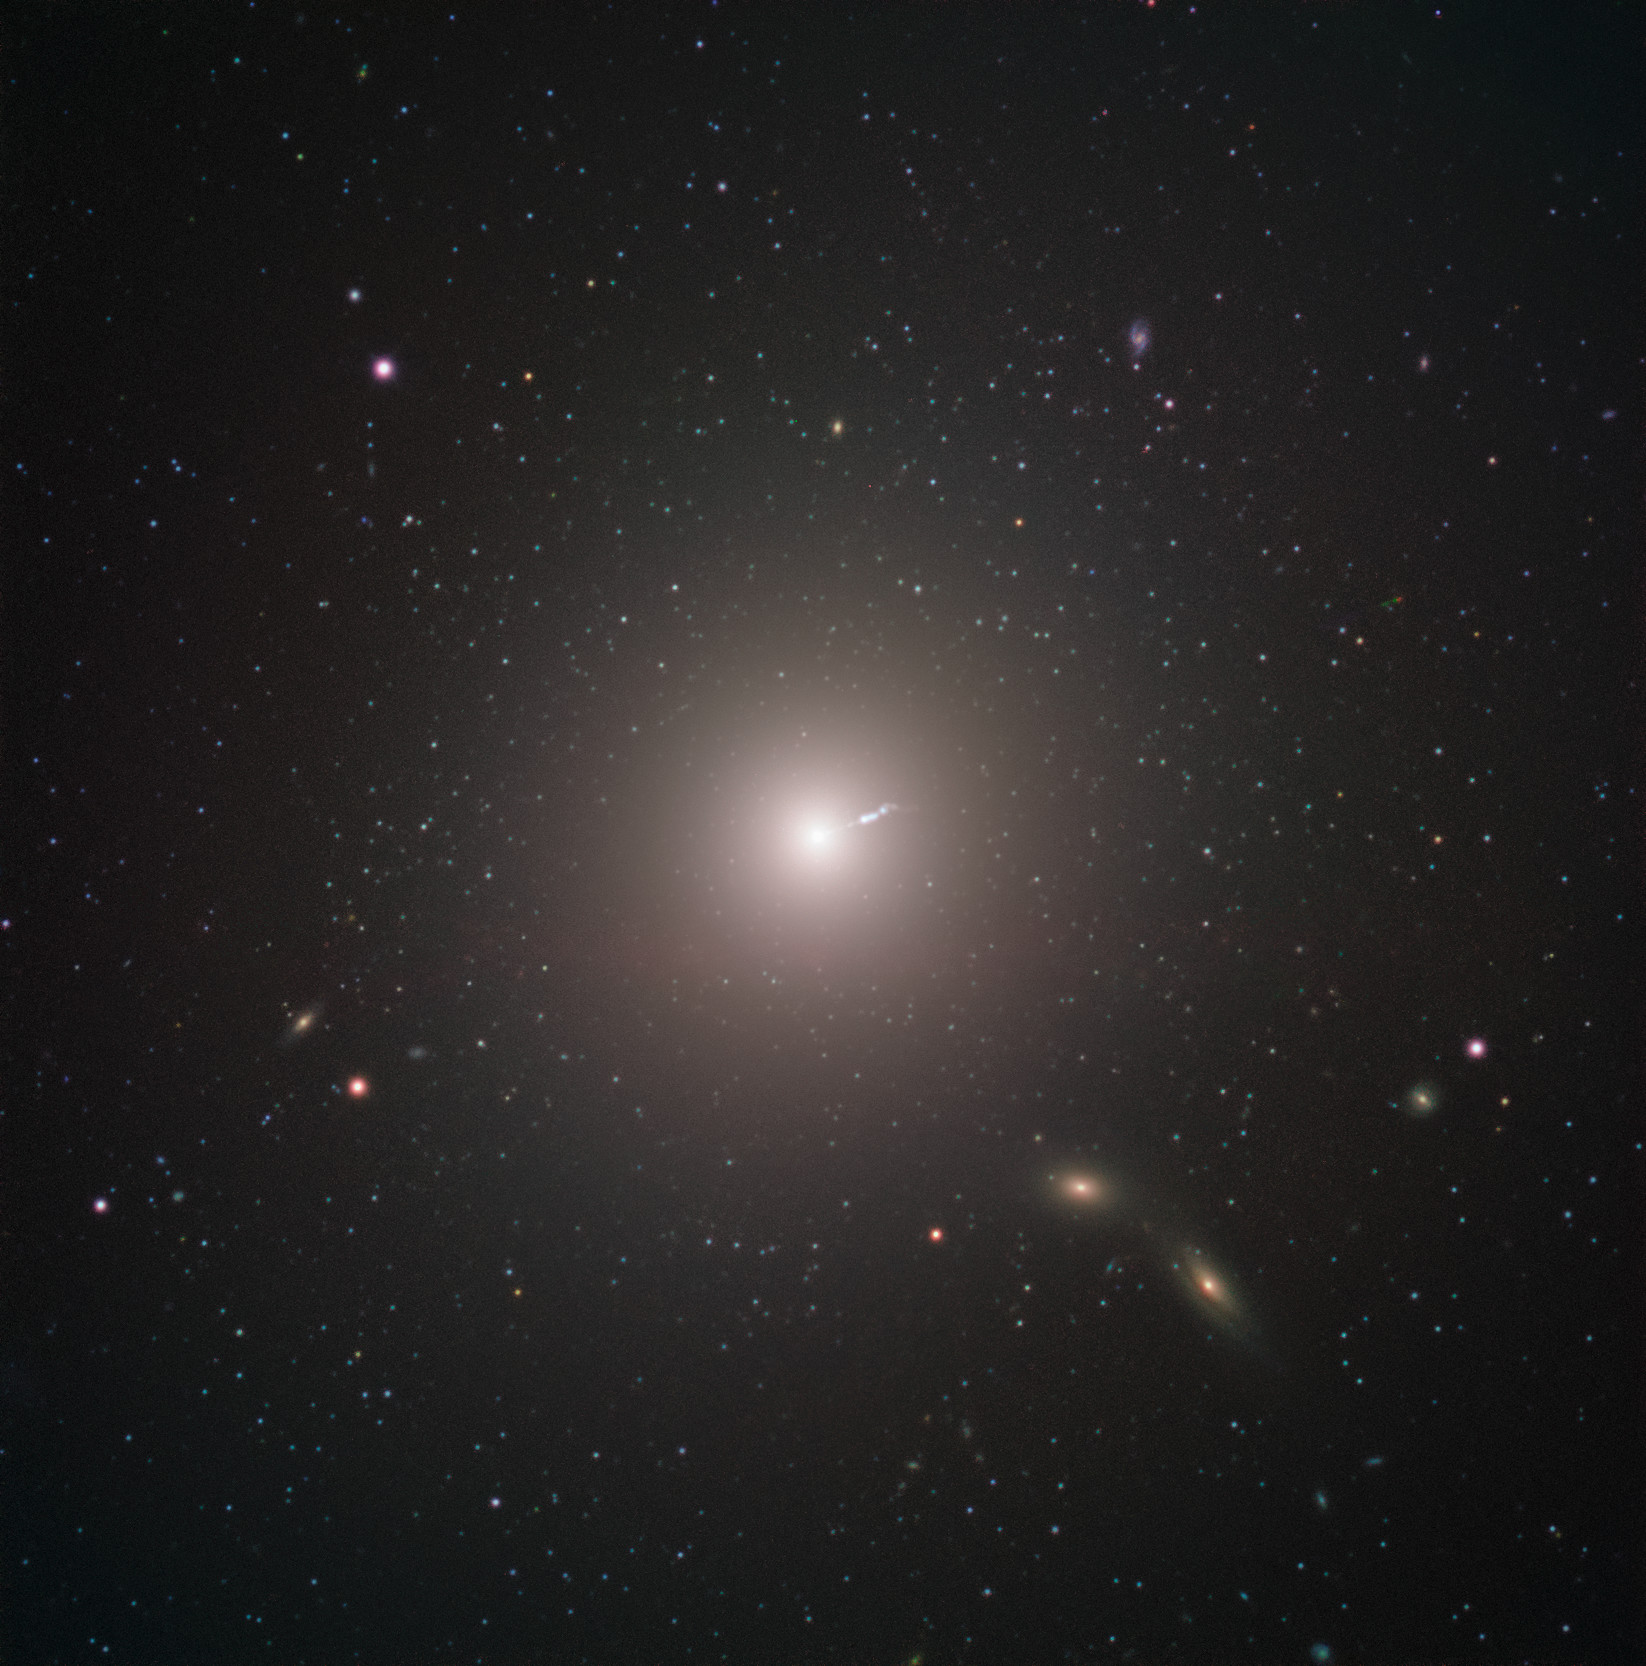 Messier 87 (M87) is an enormous elliptical galaxy located about 55 million light years from Earth, visible in the constellation Virgo. This image was captured by FORS2 on ESO’s Very Large Telescope as part of the Cosmic Gems programme, an outreach initiative that uses ESO telescopes to produce images of interesting, intriguing or visually attractive objects for the purposes of education and public outreach. The programme makes use of telescope time that cannot be used for science observations, and  produces breathtaking images of some of the most striking objects in the night sky. In case the data collected could be useful for future scientific purposes, these observations are saved and made available to astronomers through the ESO Science Archive. Credit: ESO